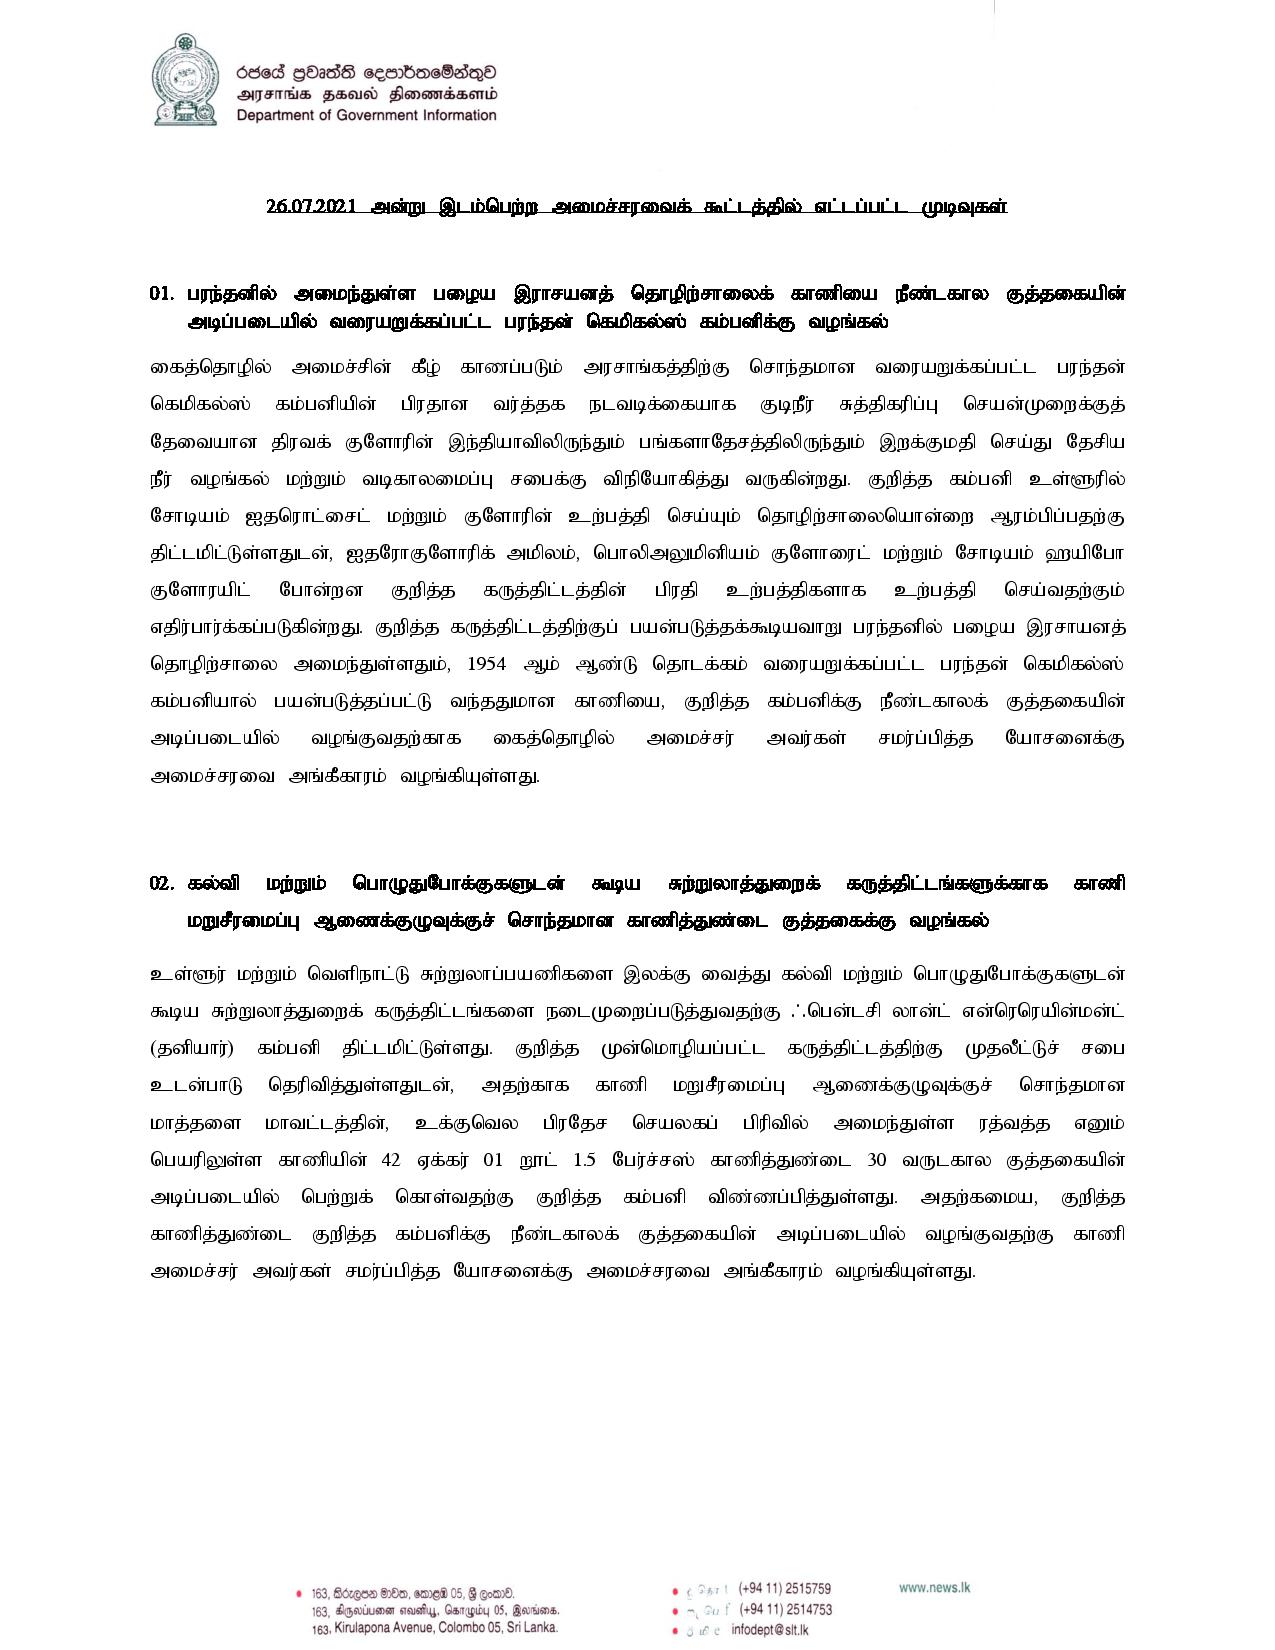 Cabinet Decision on 26.07.2021 Tamil page 001